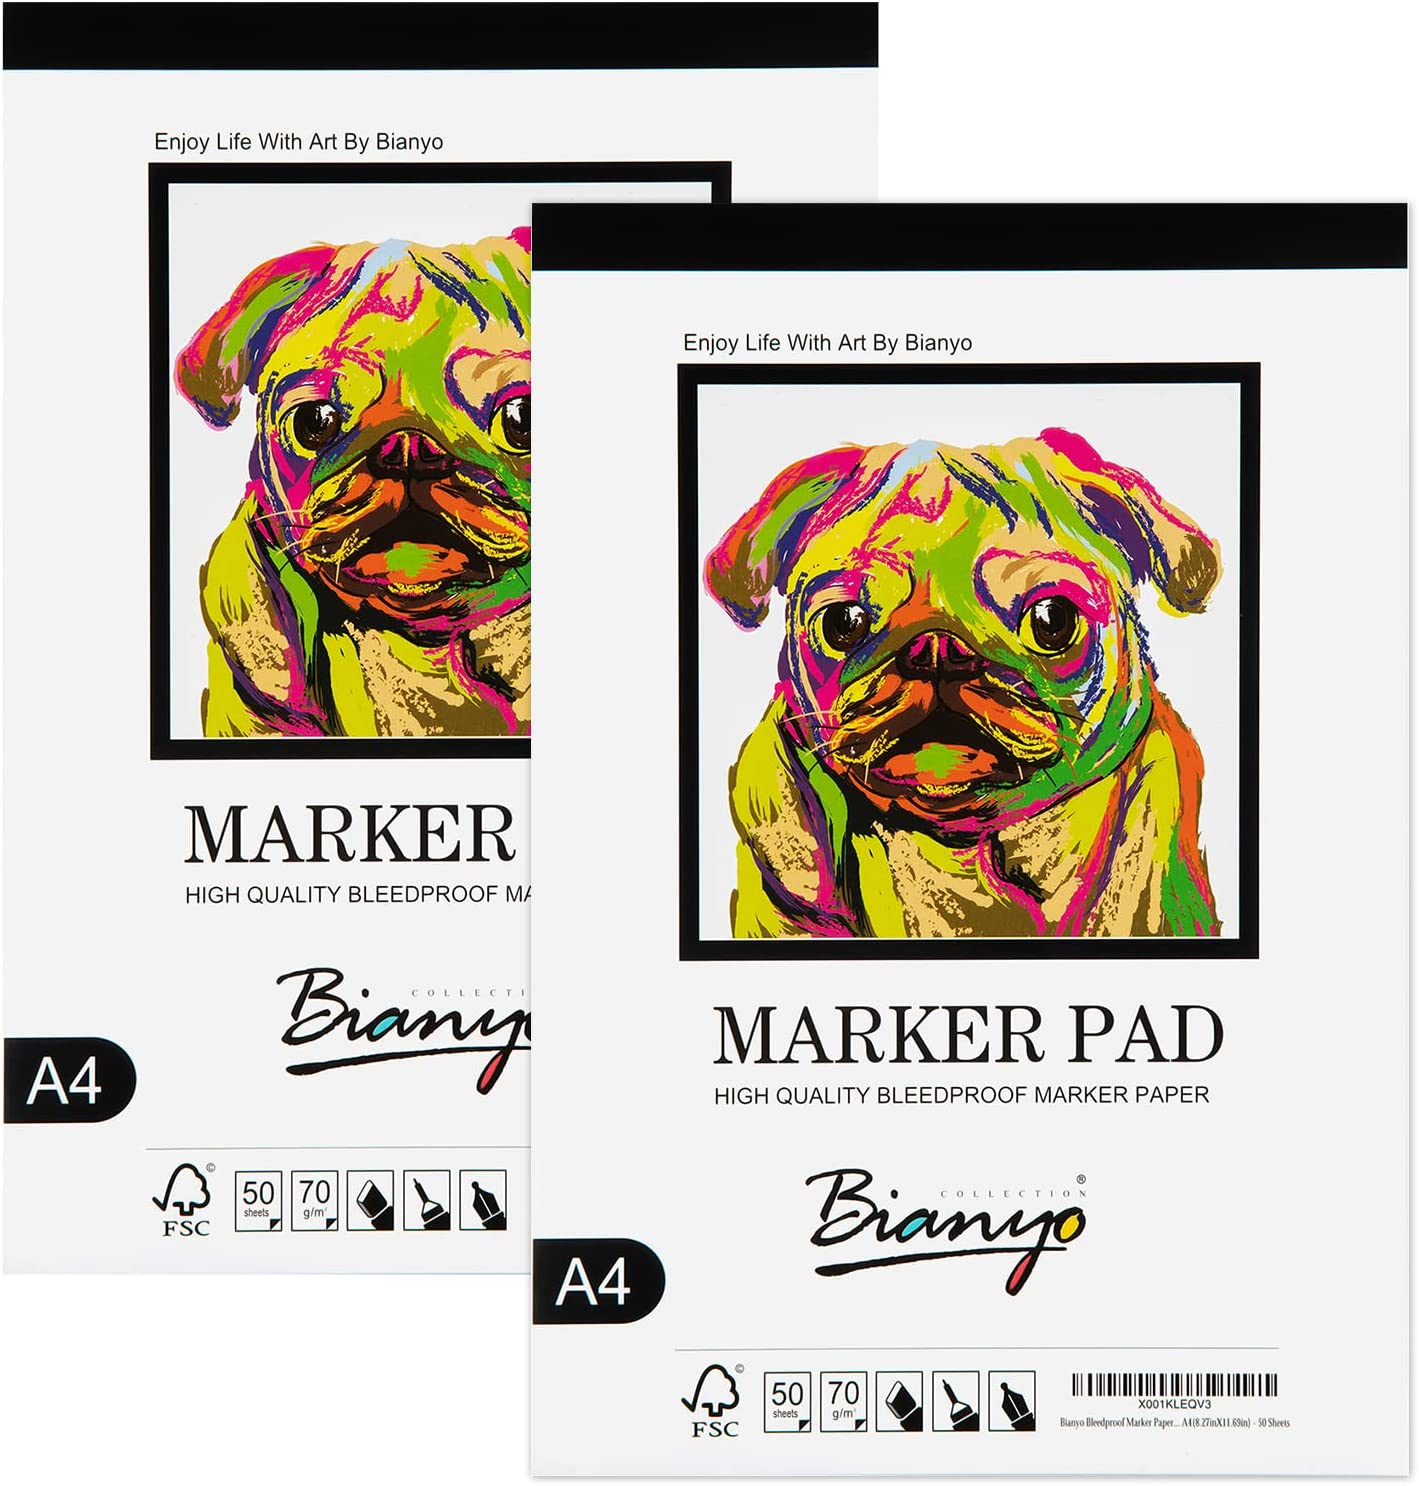 Bianyo Bleedproof Marker Paper Pad, Pack of 2 - image 1 of 6